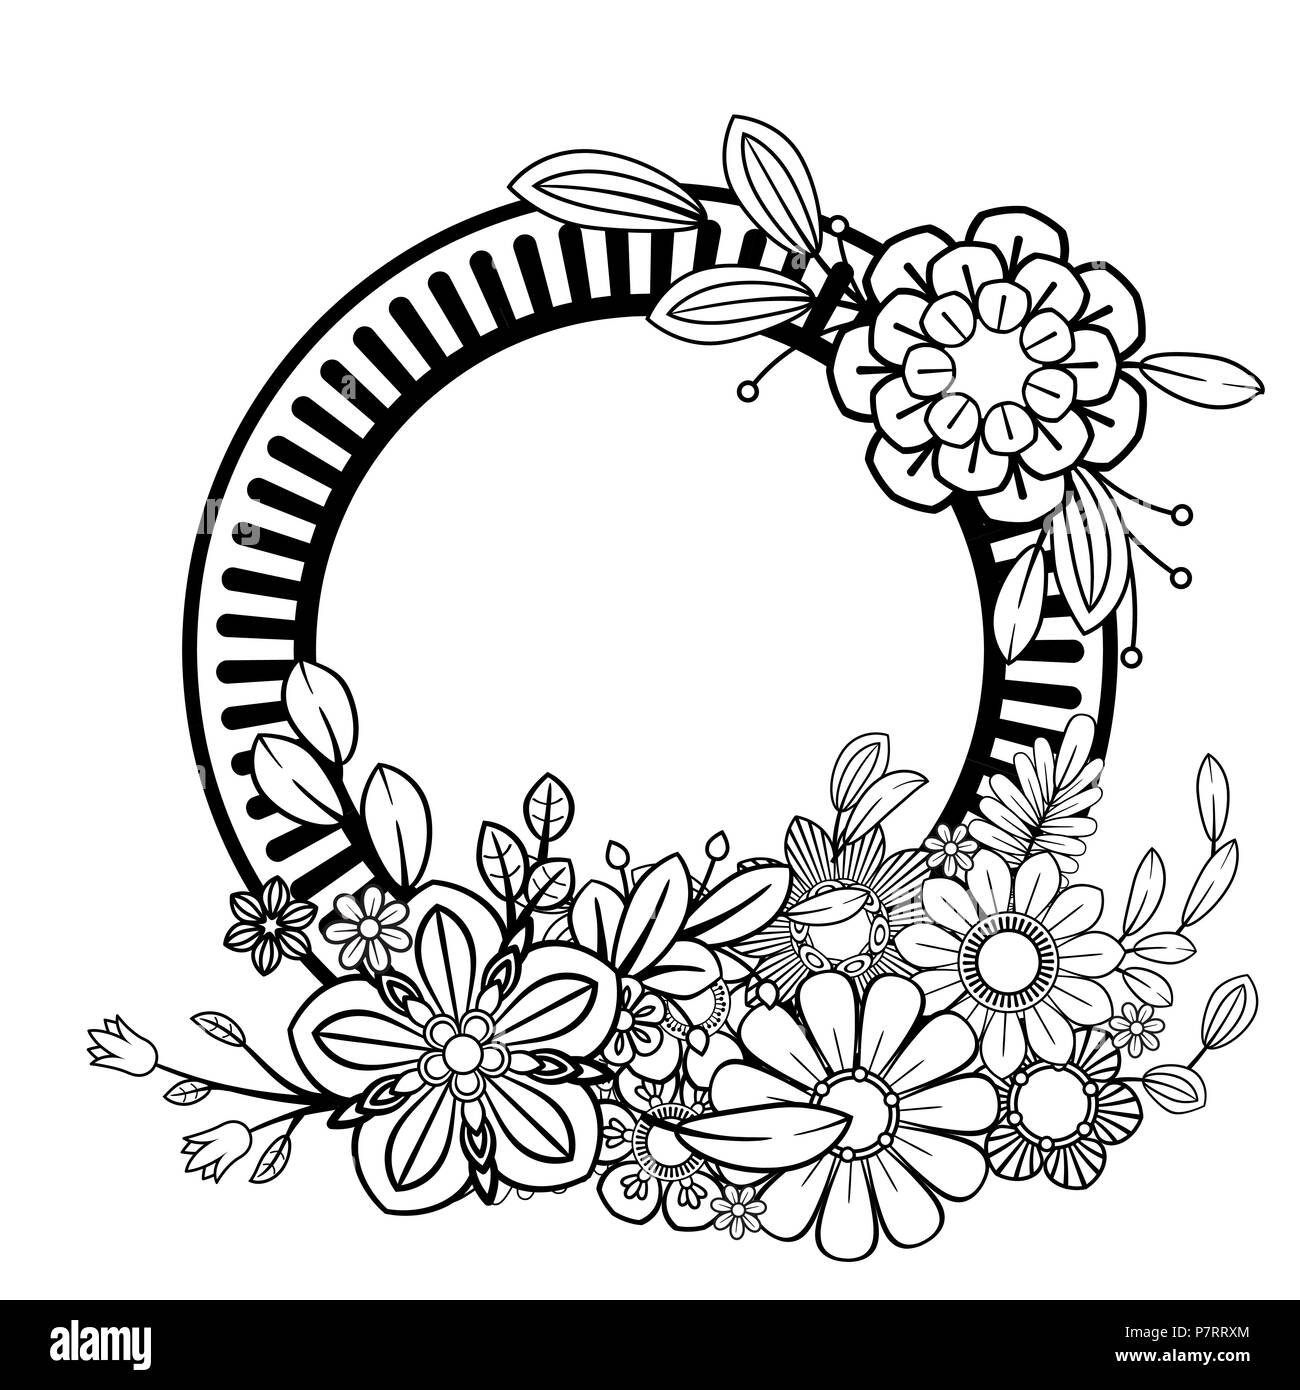 Flowers decorative frame. Isolated on white background. Floral monochrome ornament. Black and white vector illustration. Stock Vector